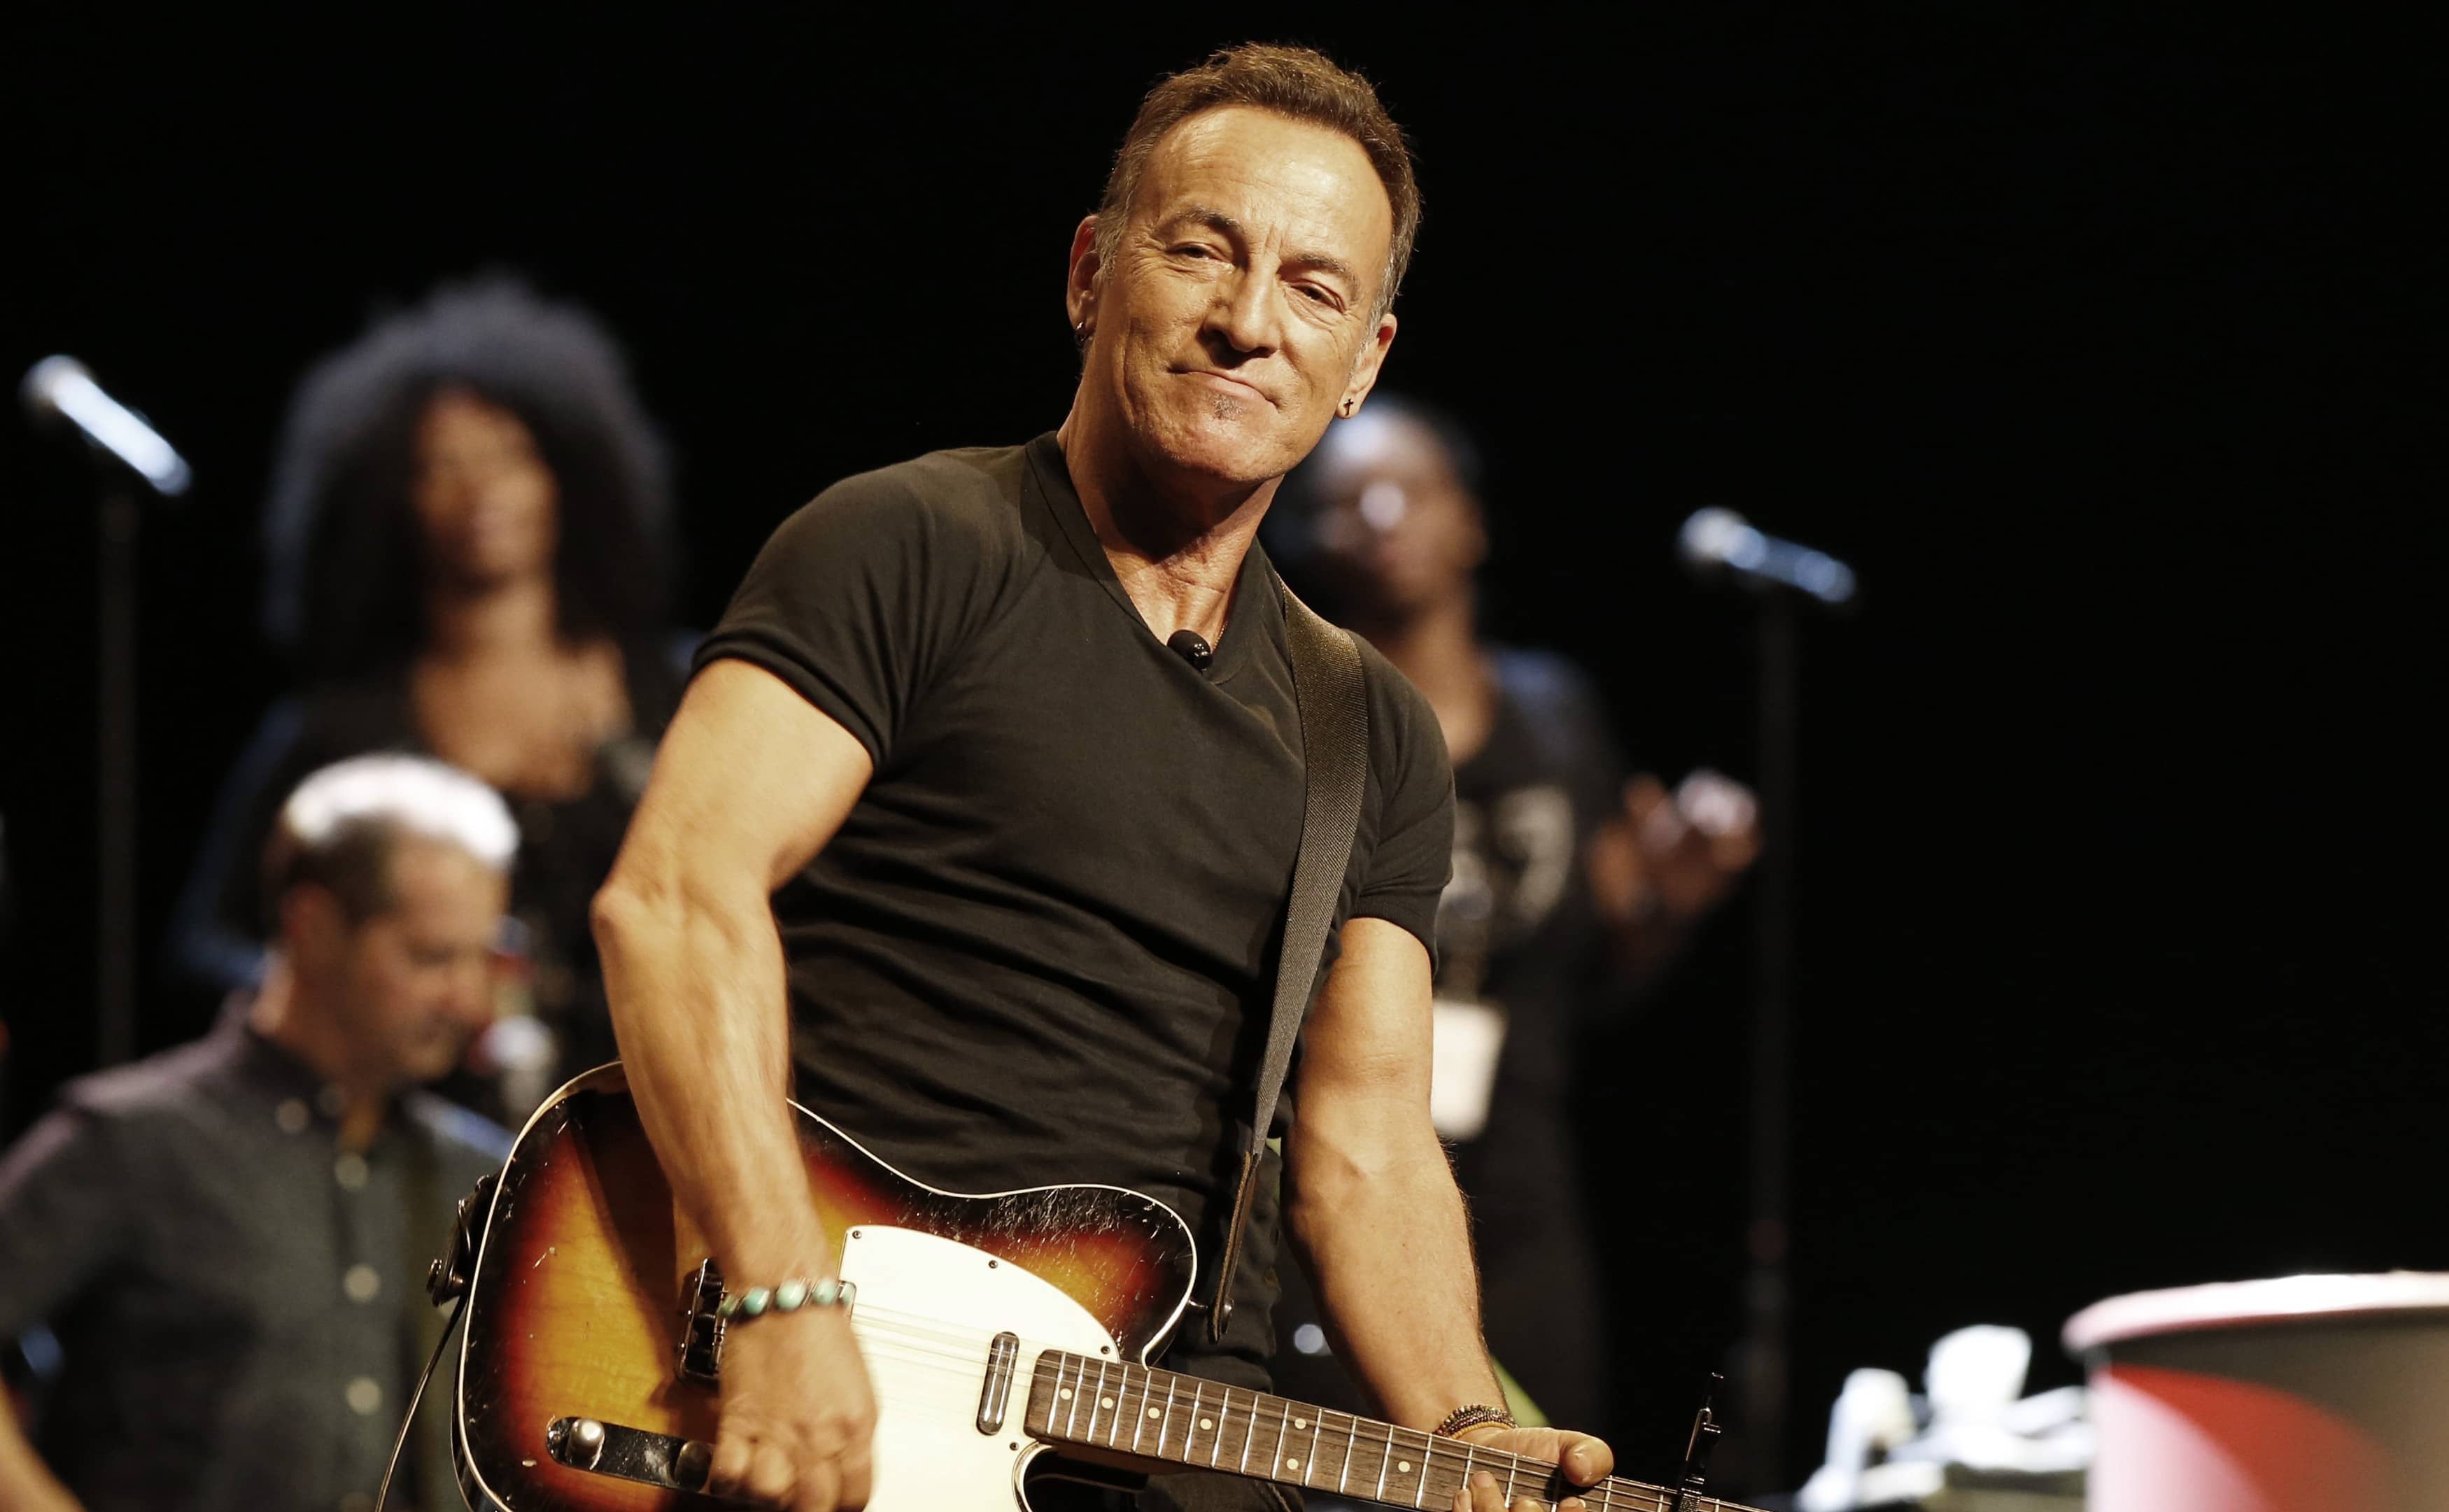 singer-bruce-springsteen-plays-during-a-sound-check-session-ahead-of-his-concert-in-cape-town